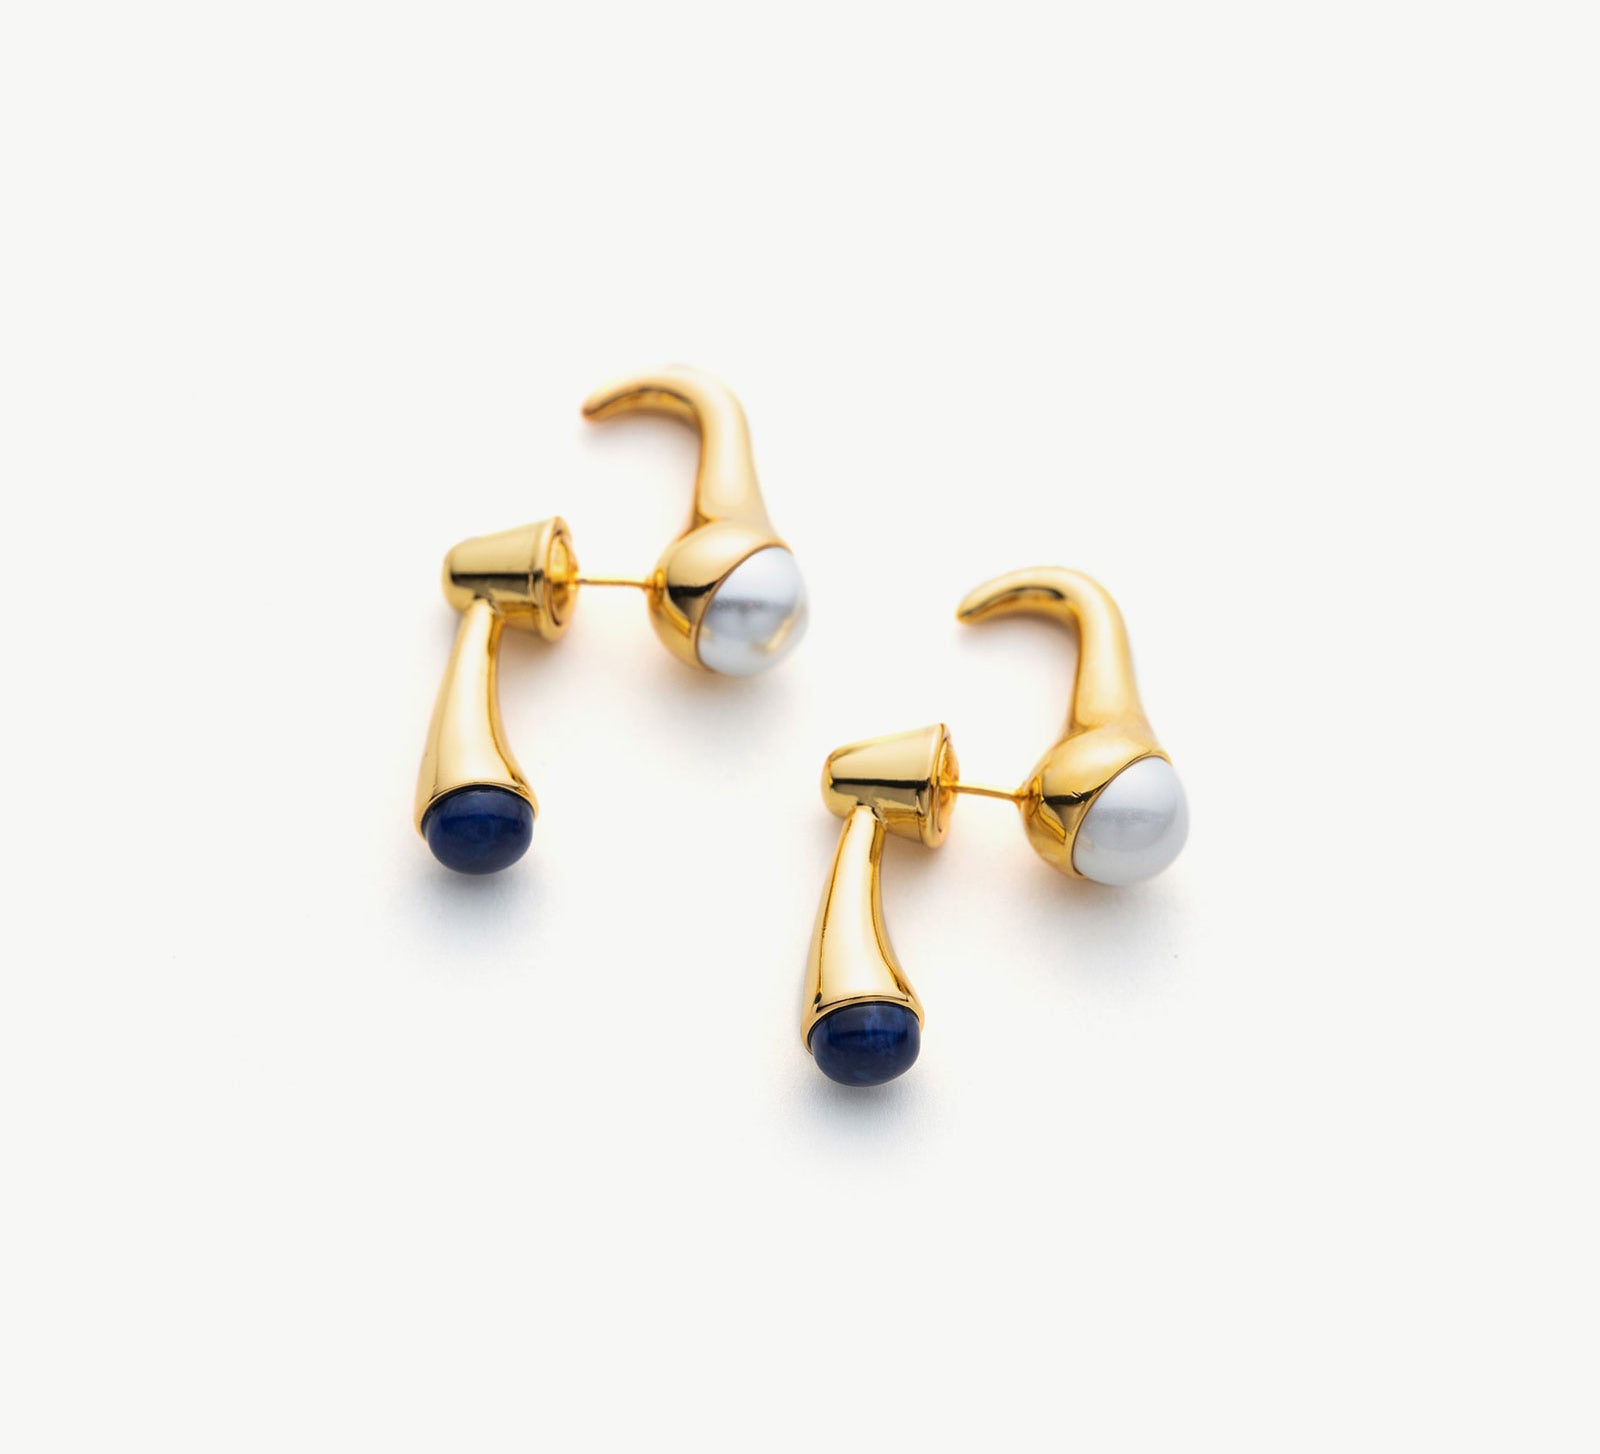 Pearl Crossover Hoop Earrings, a timeless and elegant accessory featuring lustrous pearls in a captivating crossover design for a classic look